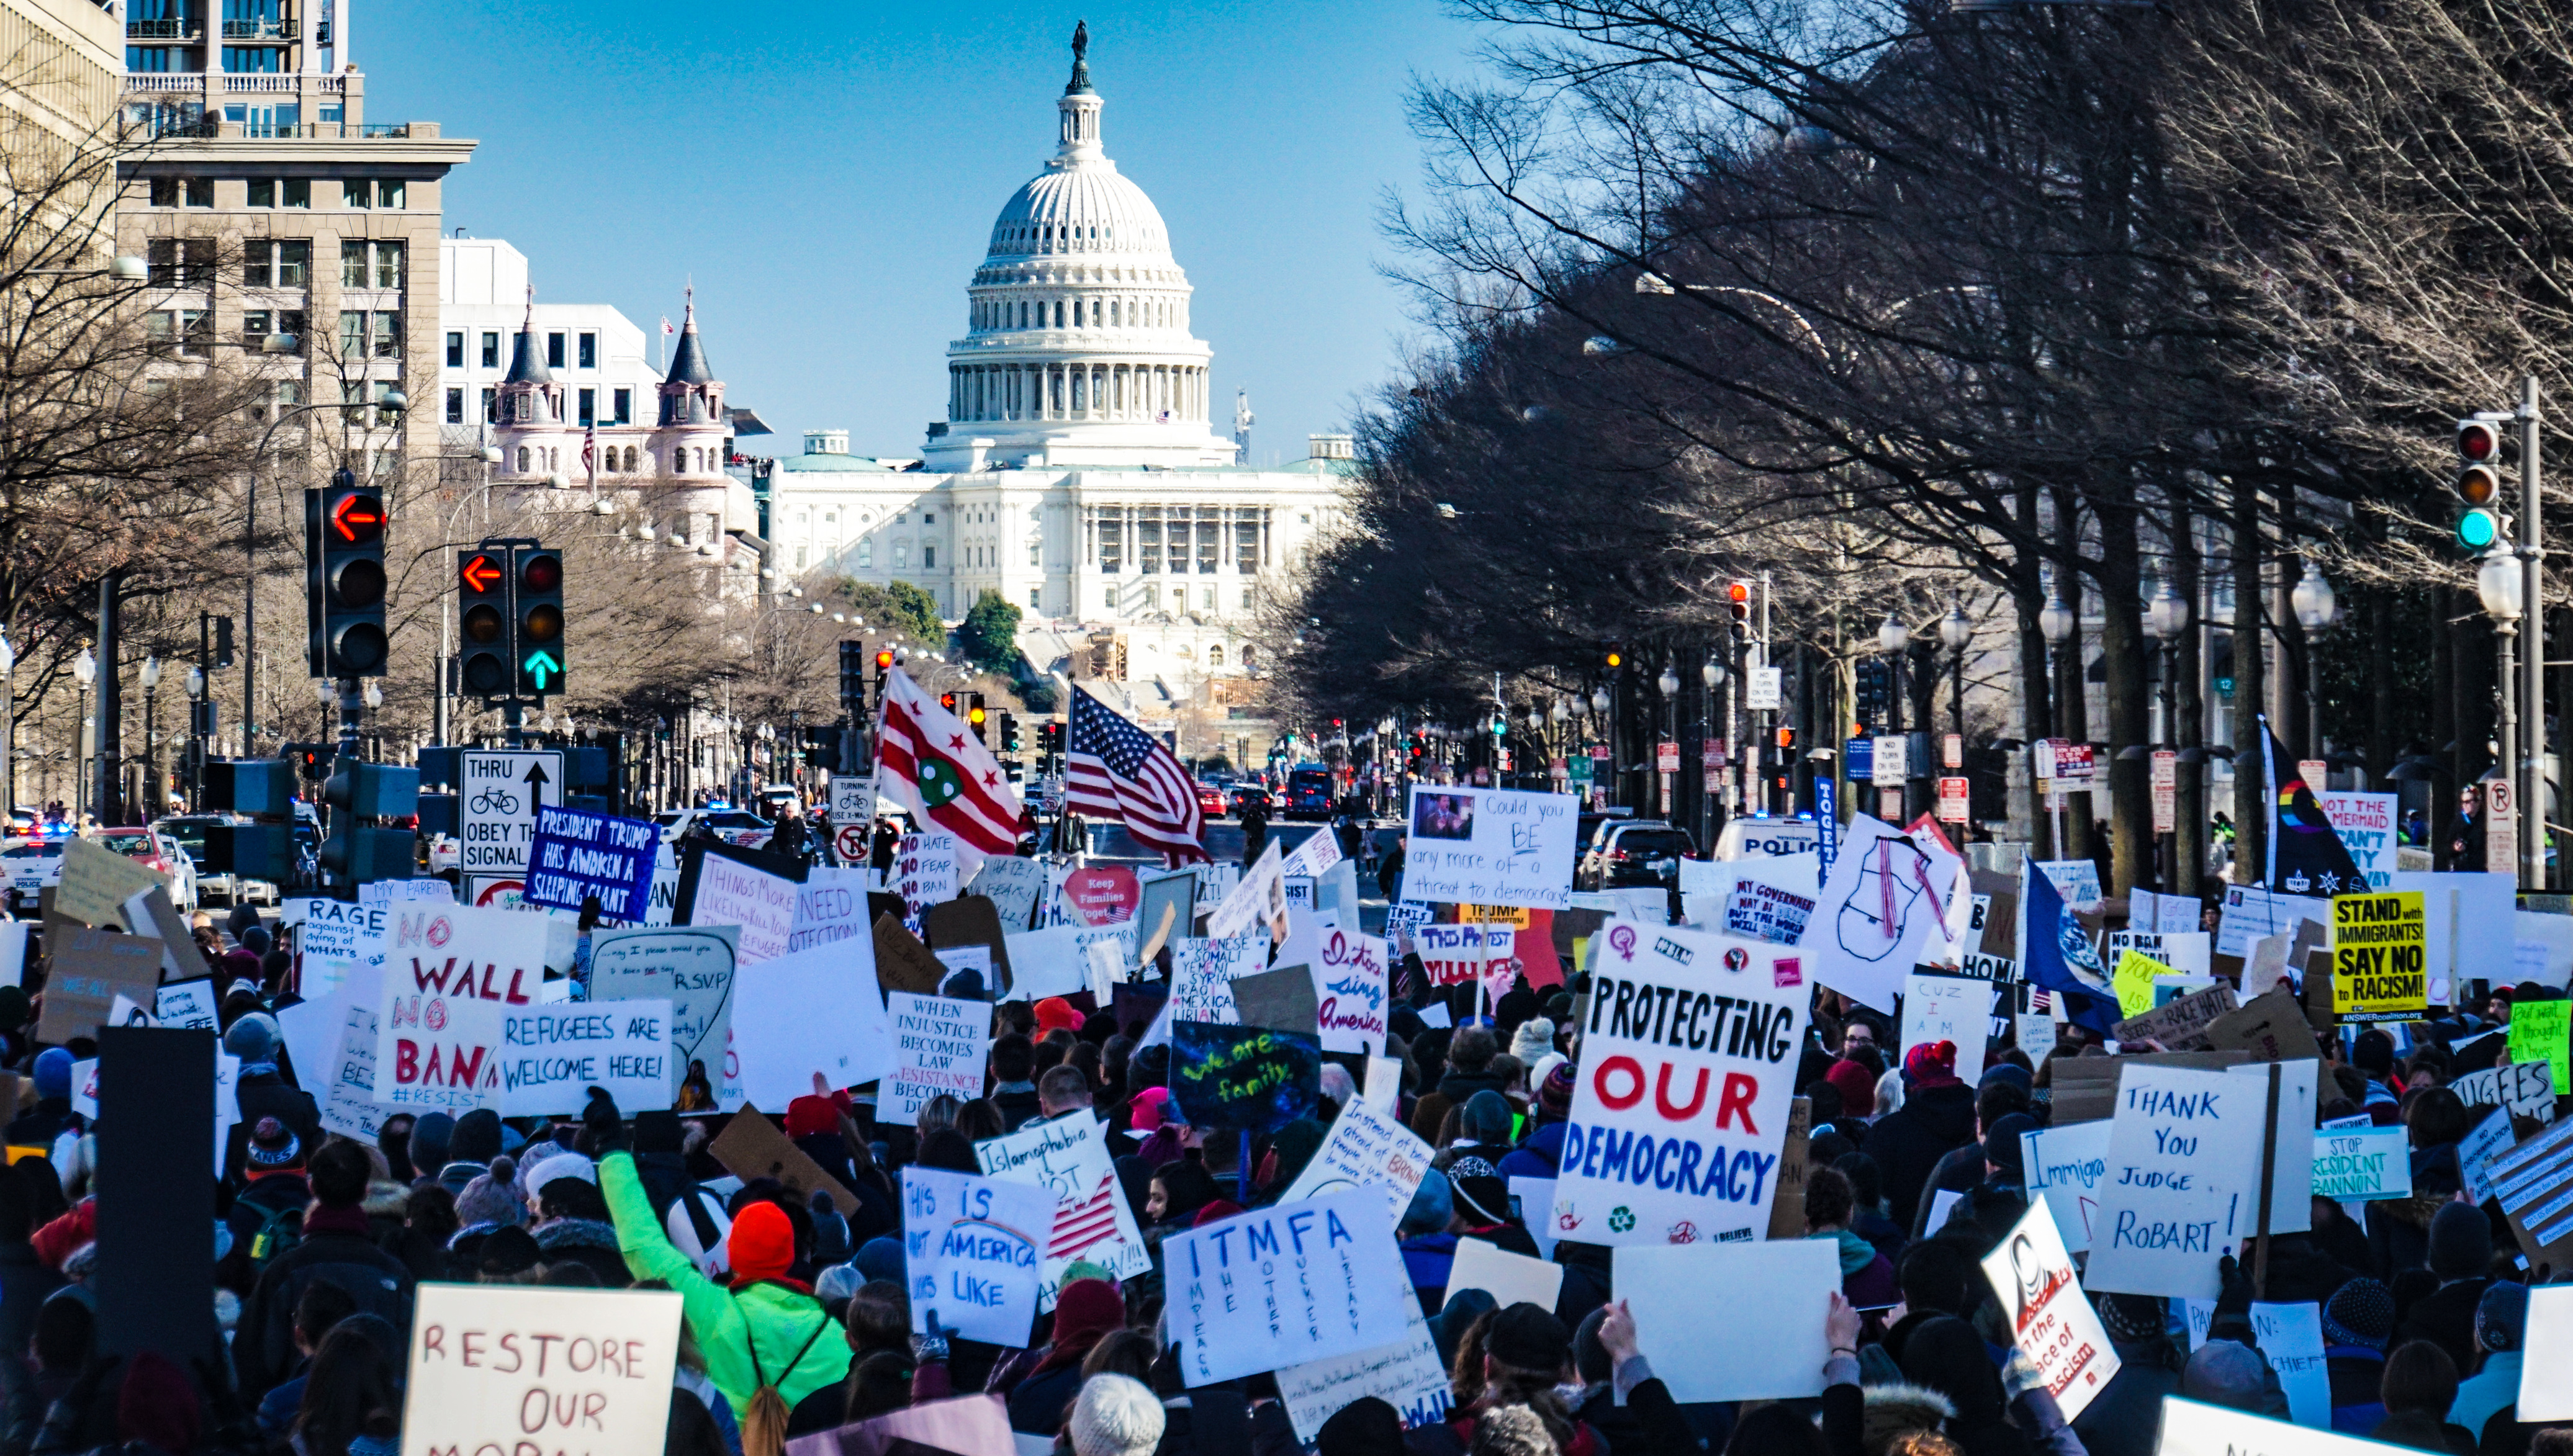 Protest in Washington, DC (photo credit: Ted Eytan/flickr)